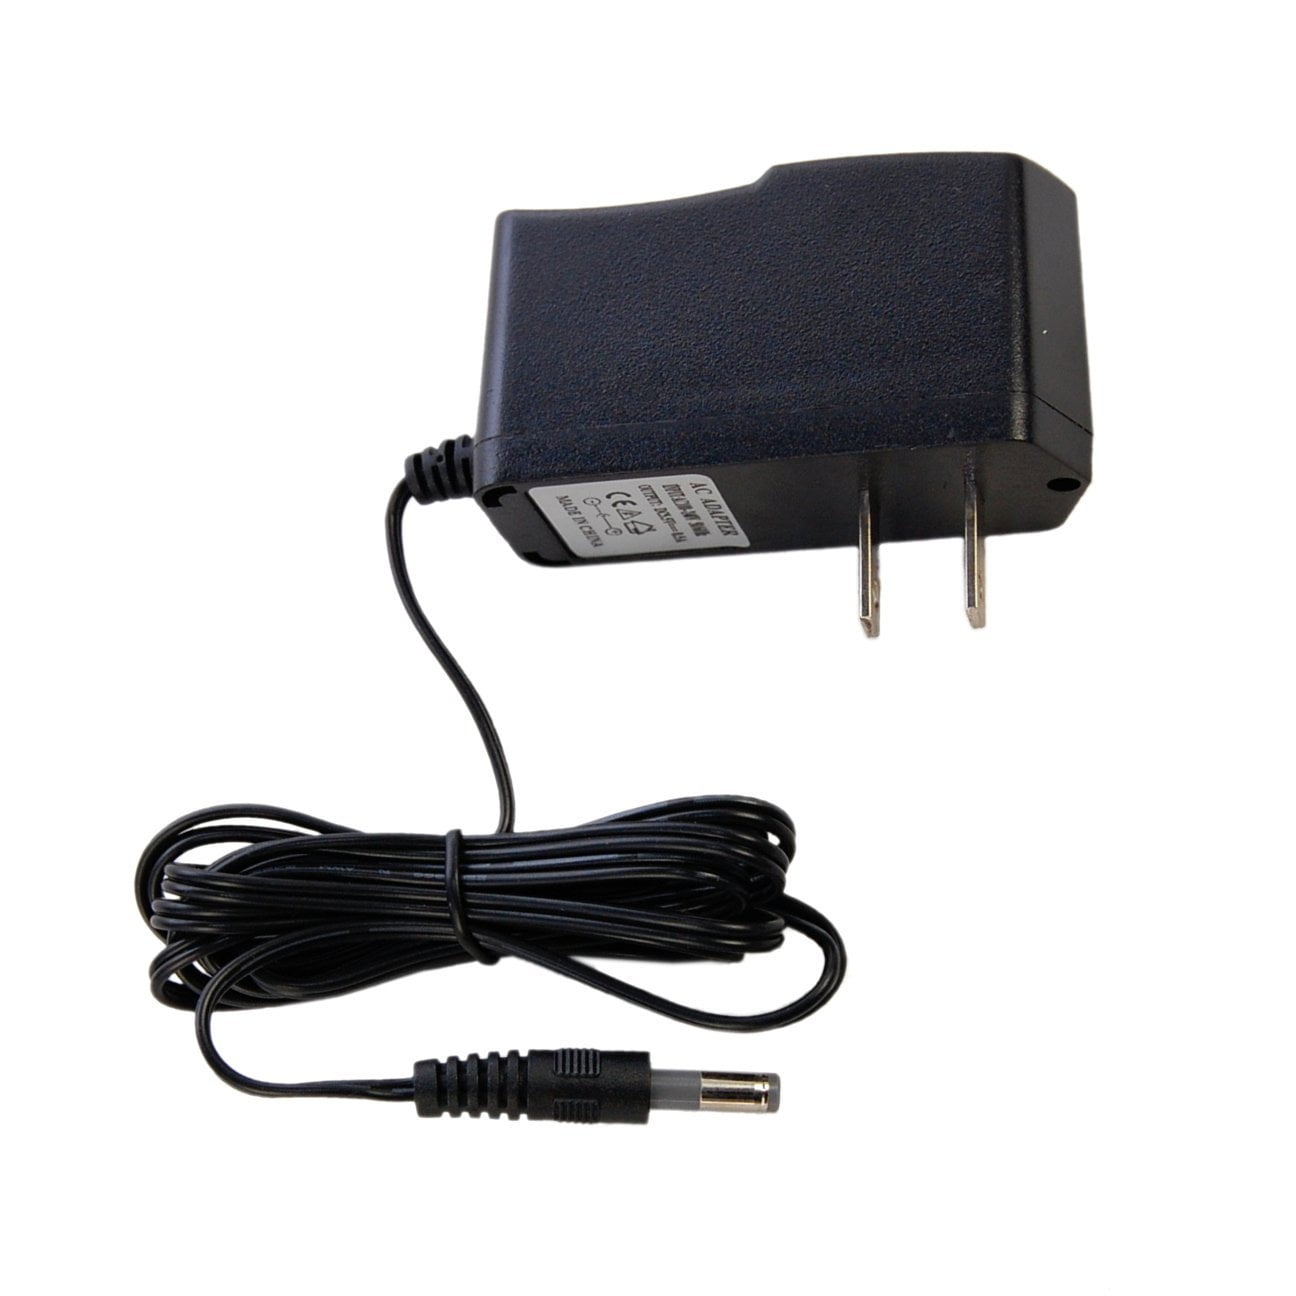 Hqrp AC Power Adapter for Omron Healthcare 5 Series / 7 Series / 10 Series / 10 Series+ Upper Arm Blood Pressure Monitor + Hqrp Euro Plug Adapter